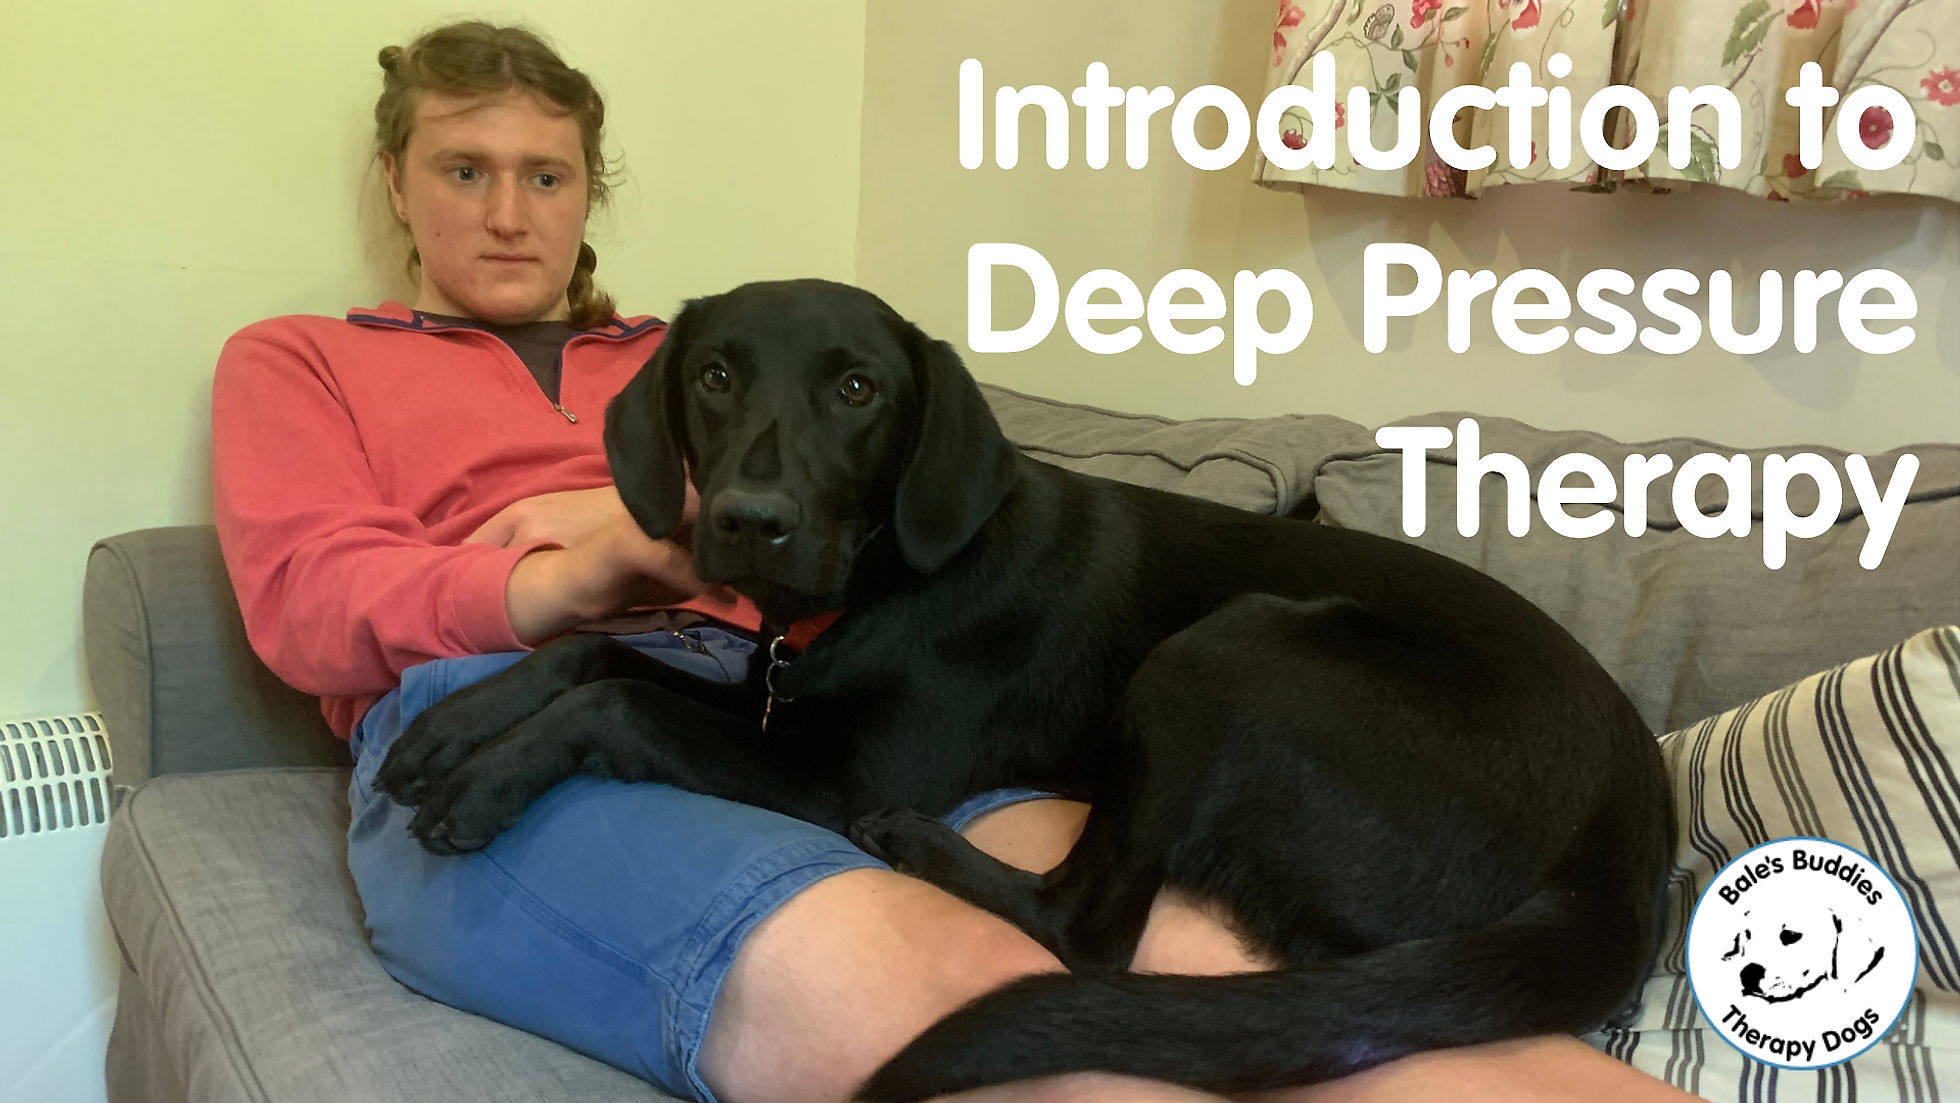 Introduction to Deep Pressure Therapy